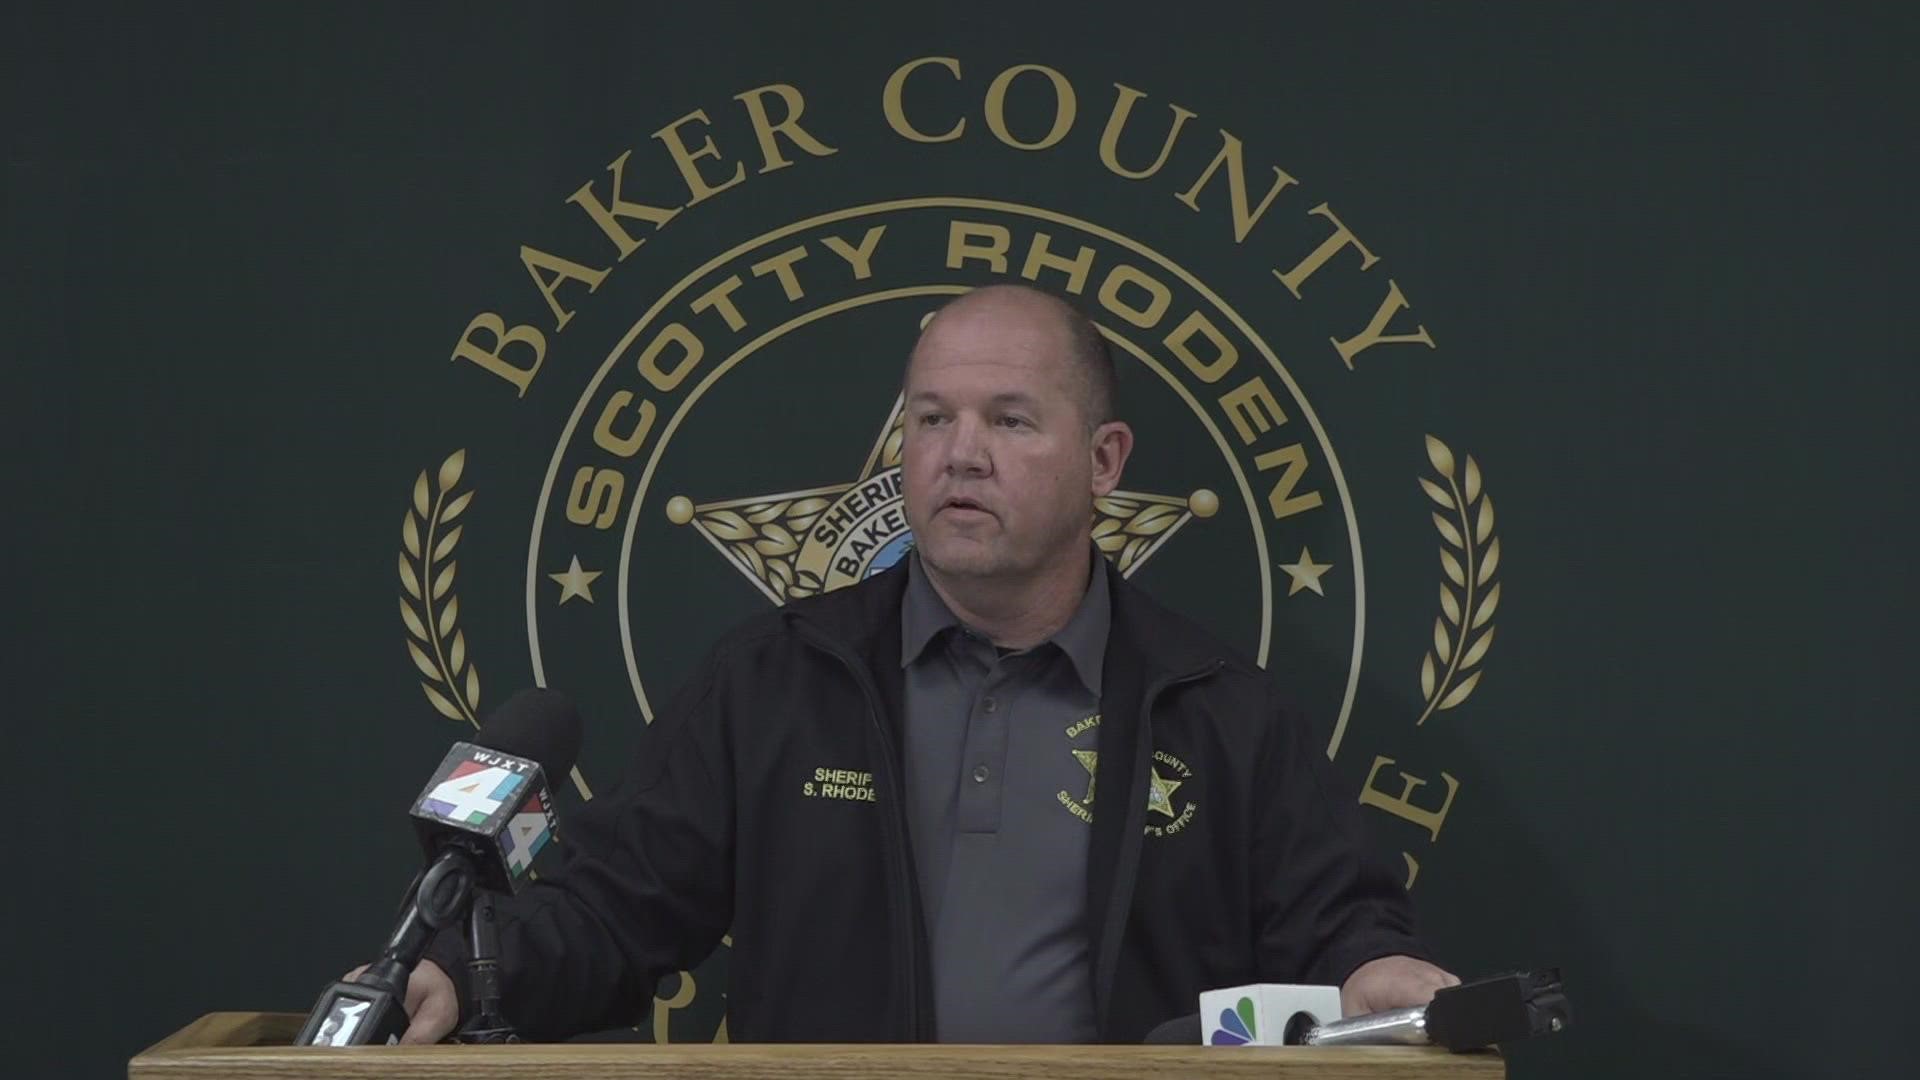 The sheriff believes that David “Daniel” Sigers and James Michael “Bo” Thomas were targeted.